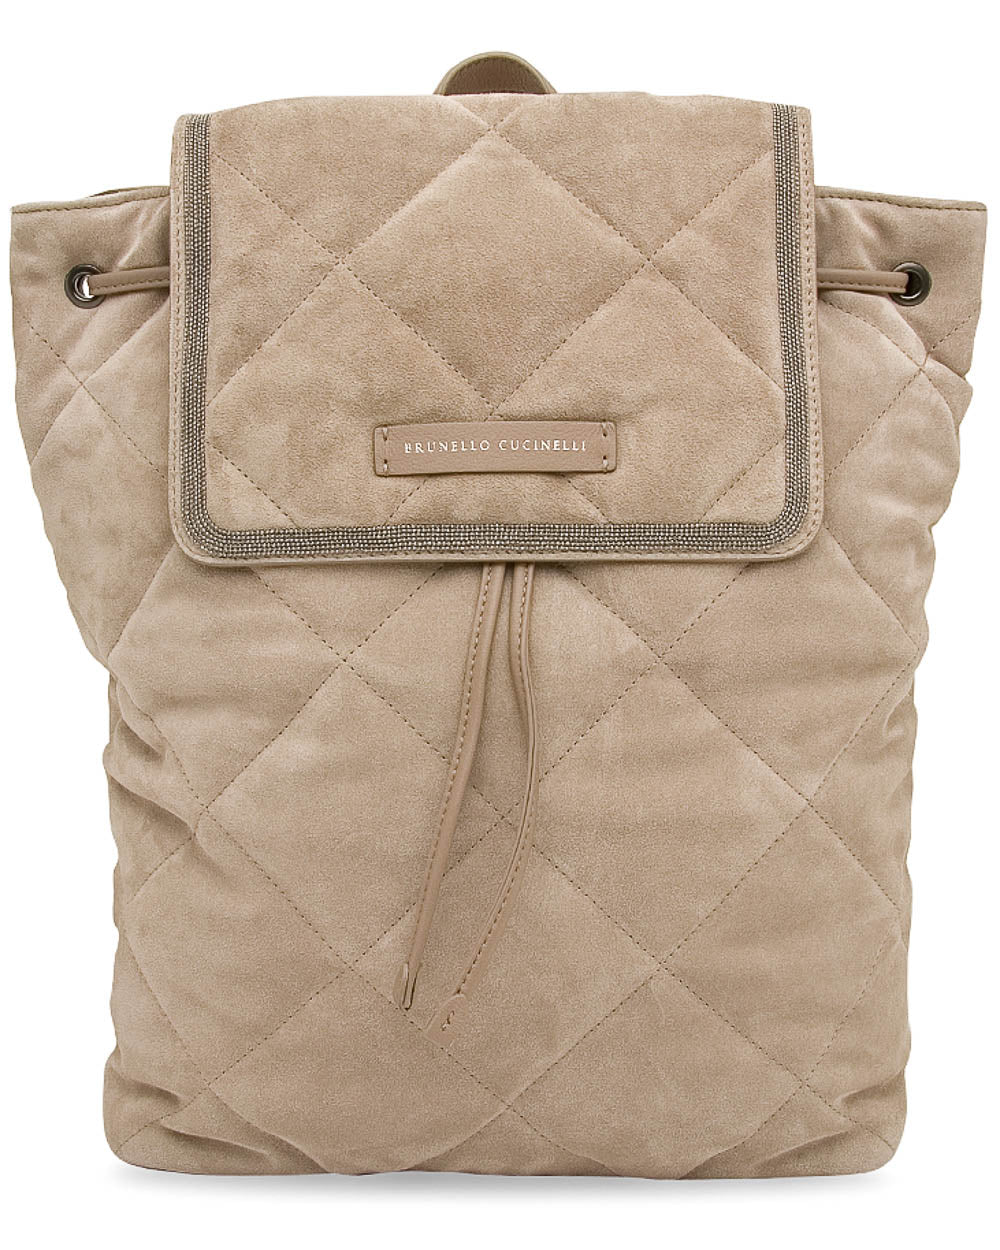 Monili embellished Quilted Backpack in Stone